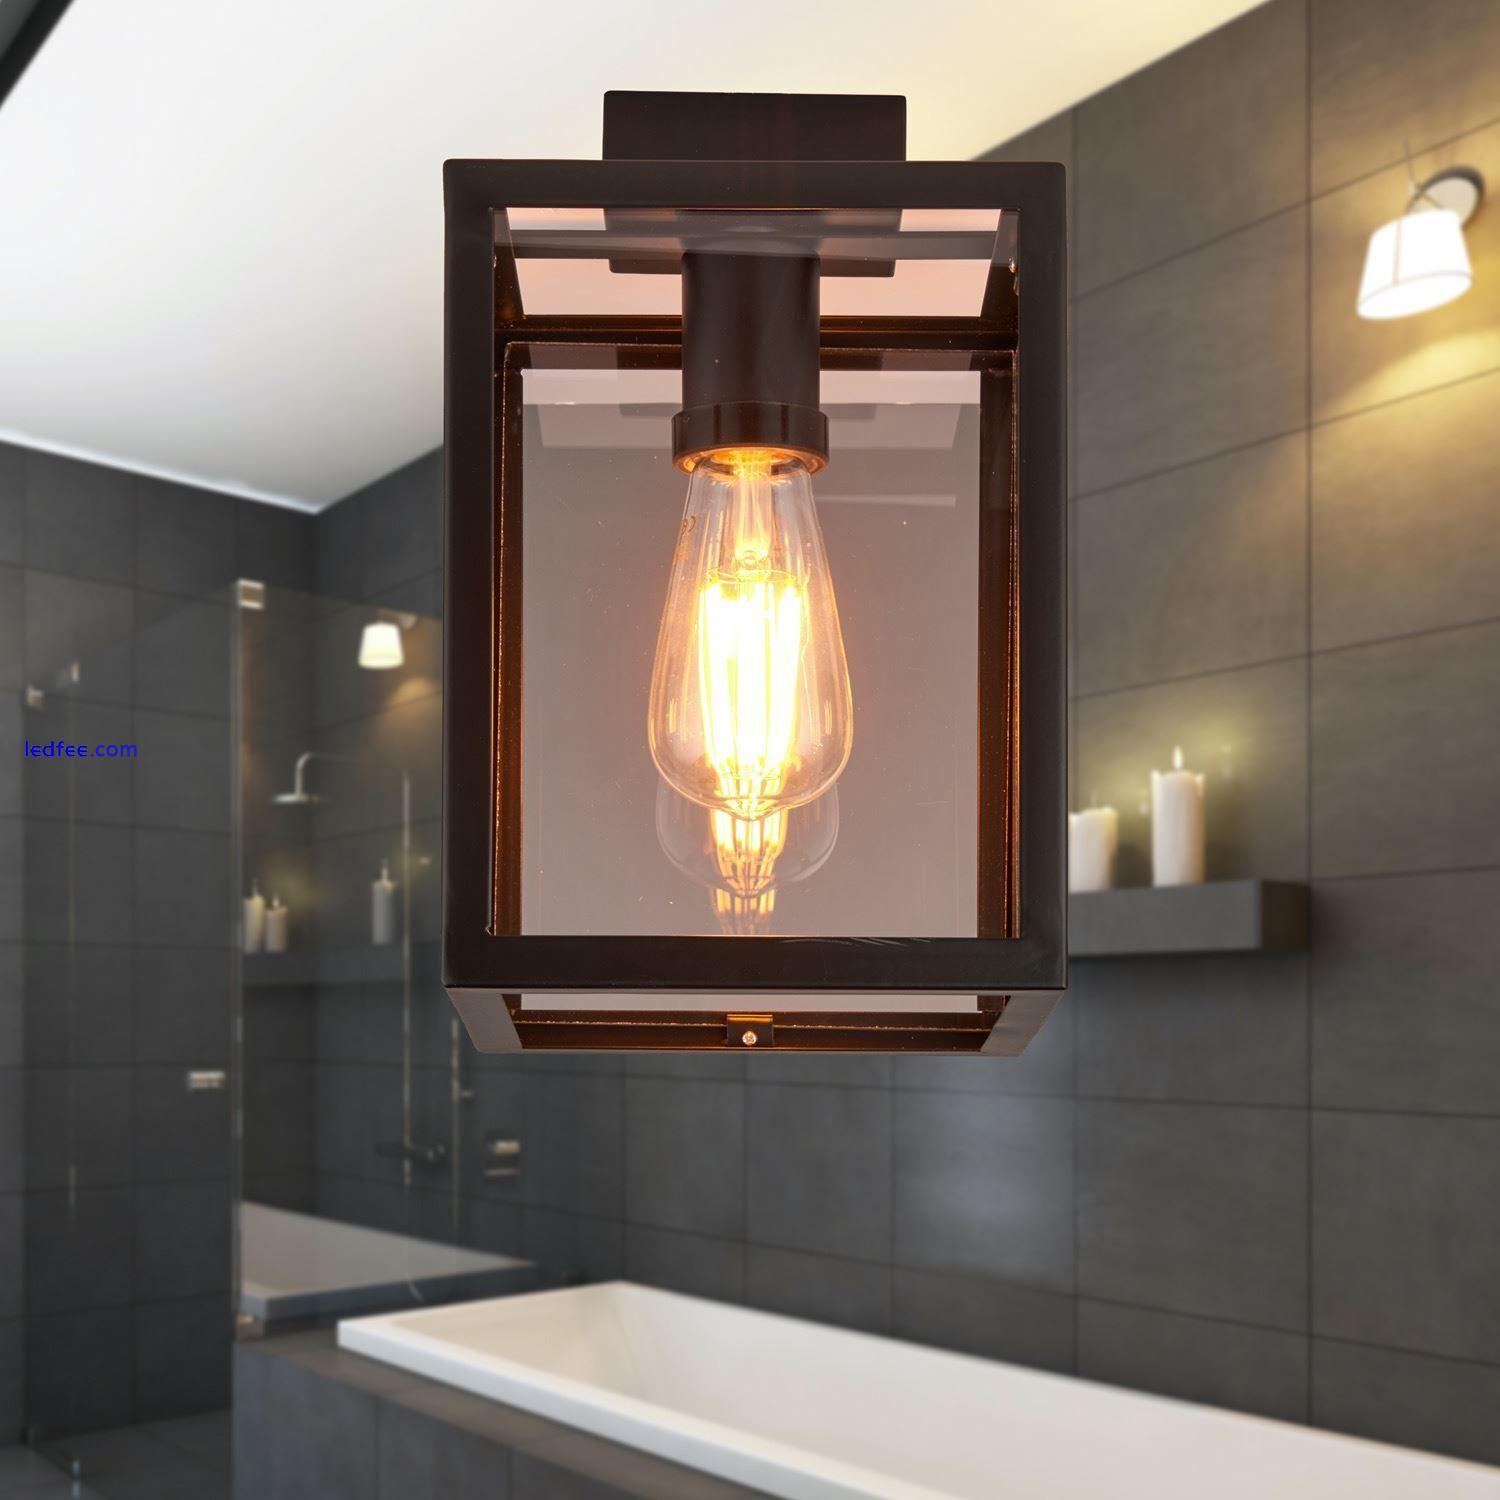 Modern Black Ceiling Flush Light Fitting IP44 Rated Bathroom Outdoor Porch 2 